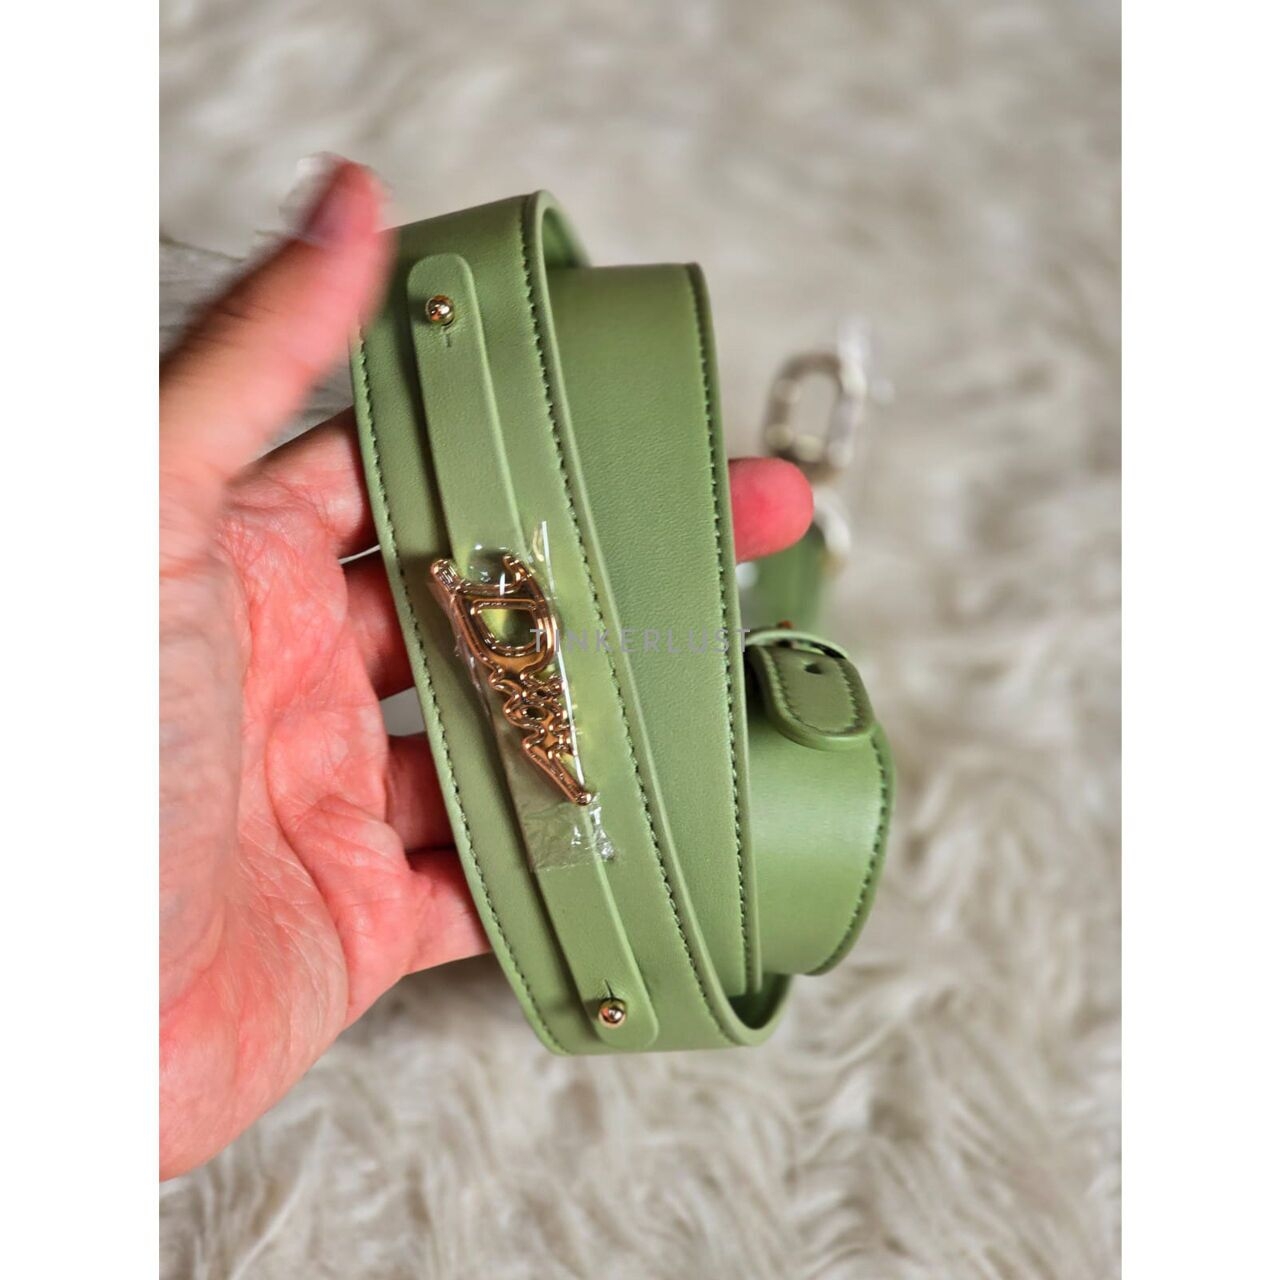 Christian Dior Green Small Pin GHW Satchel